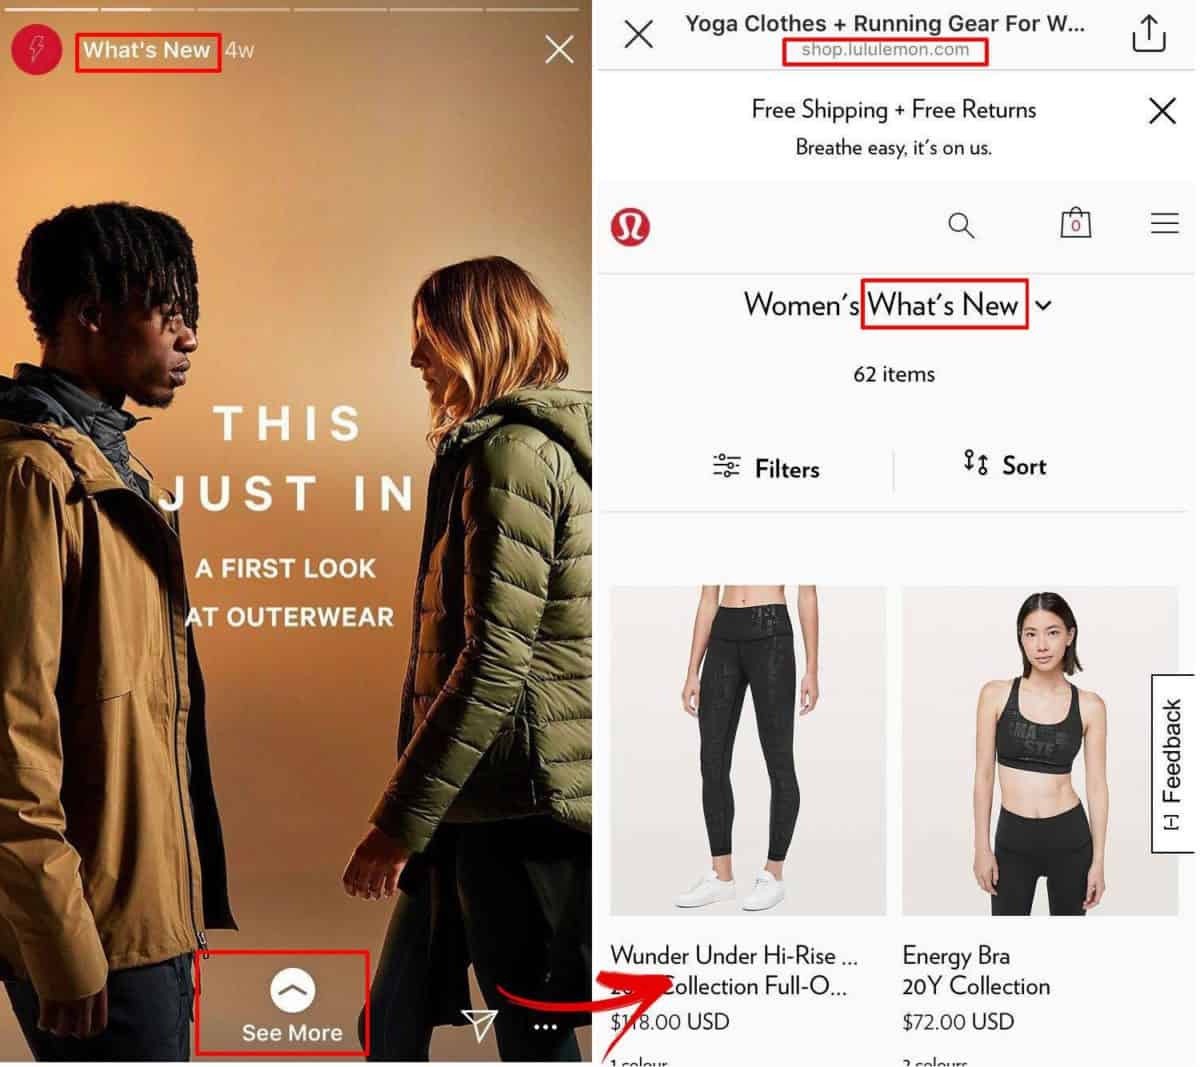 Lululemon website pages show followers available options without overposting to Increase ecommerce sales